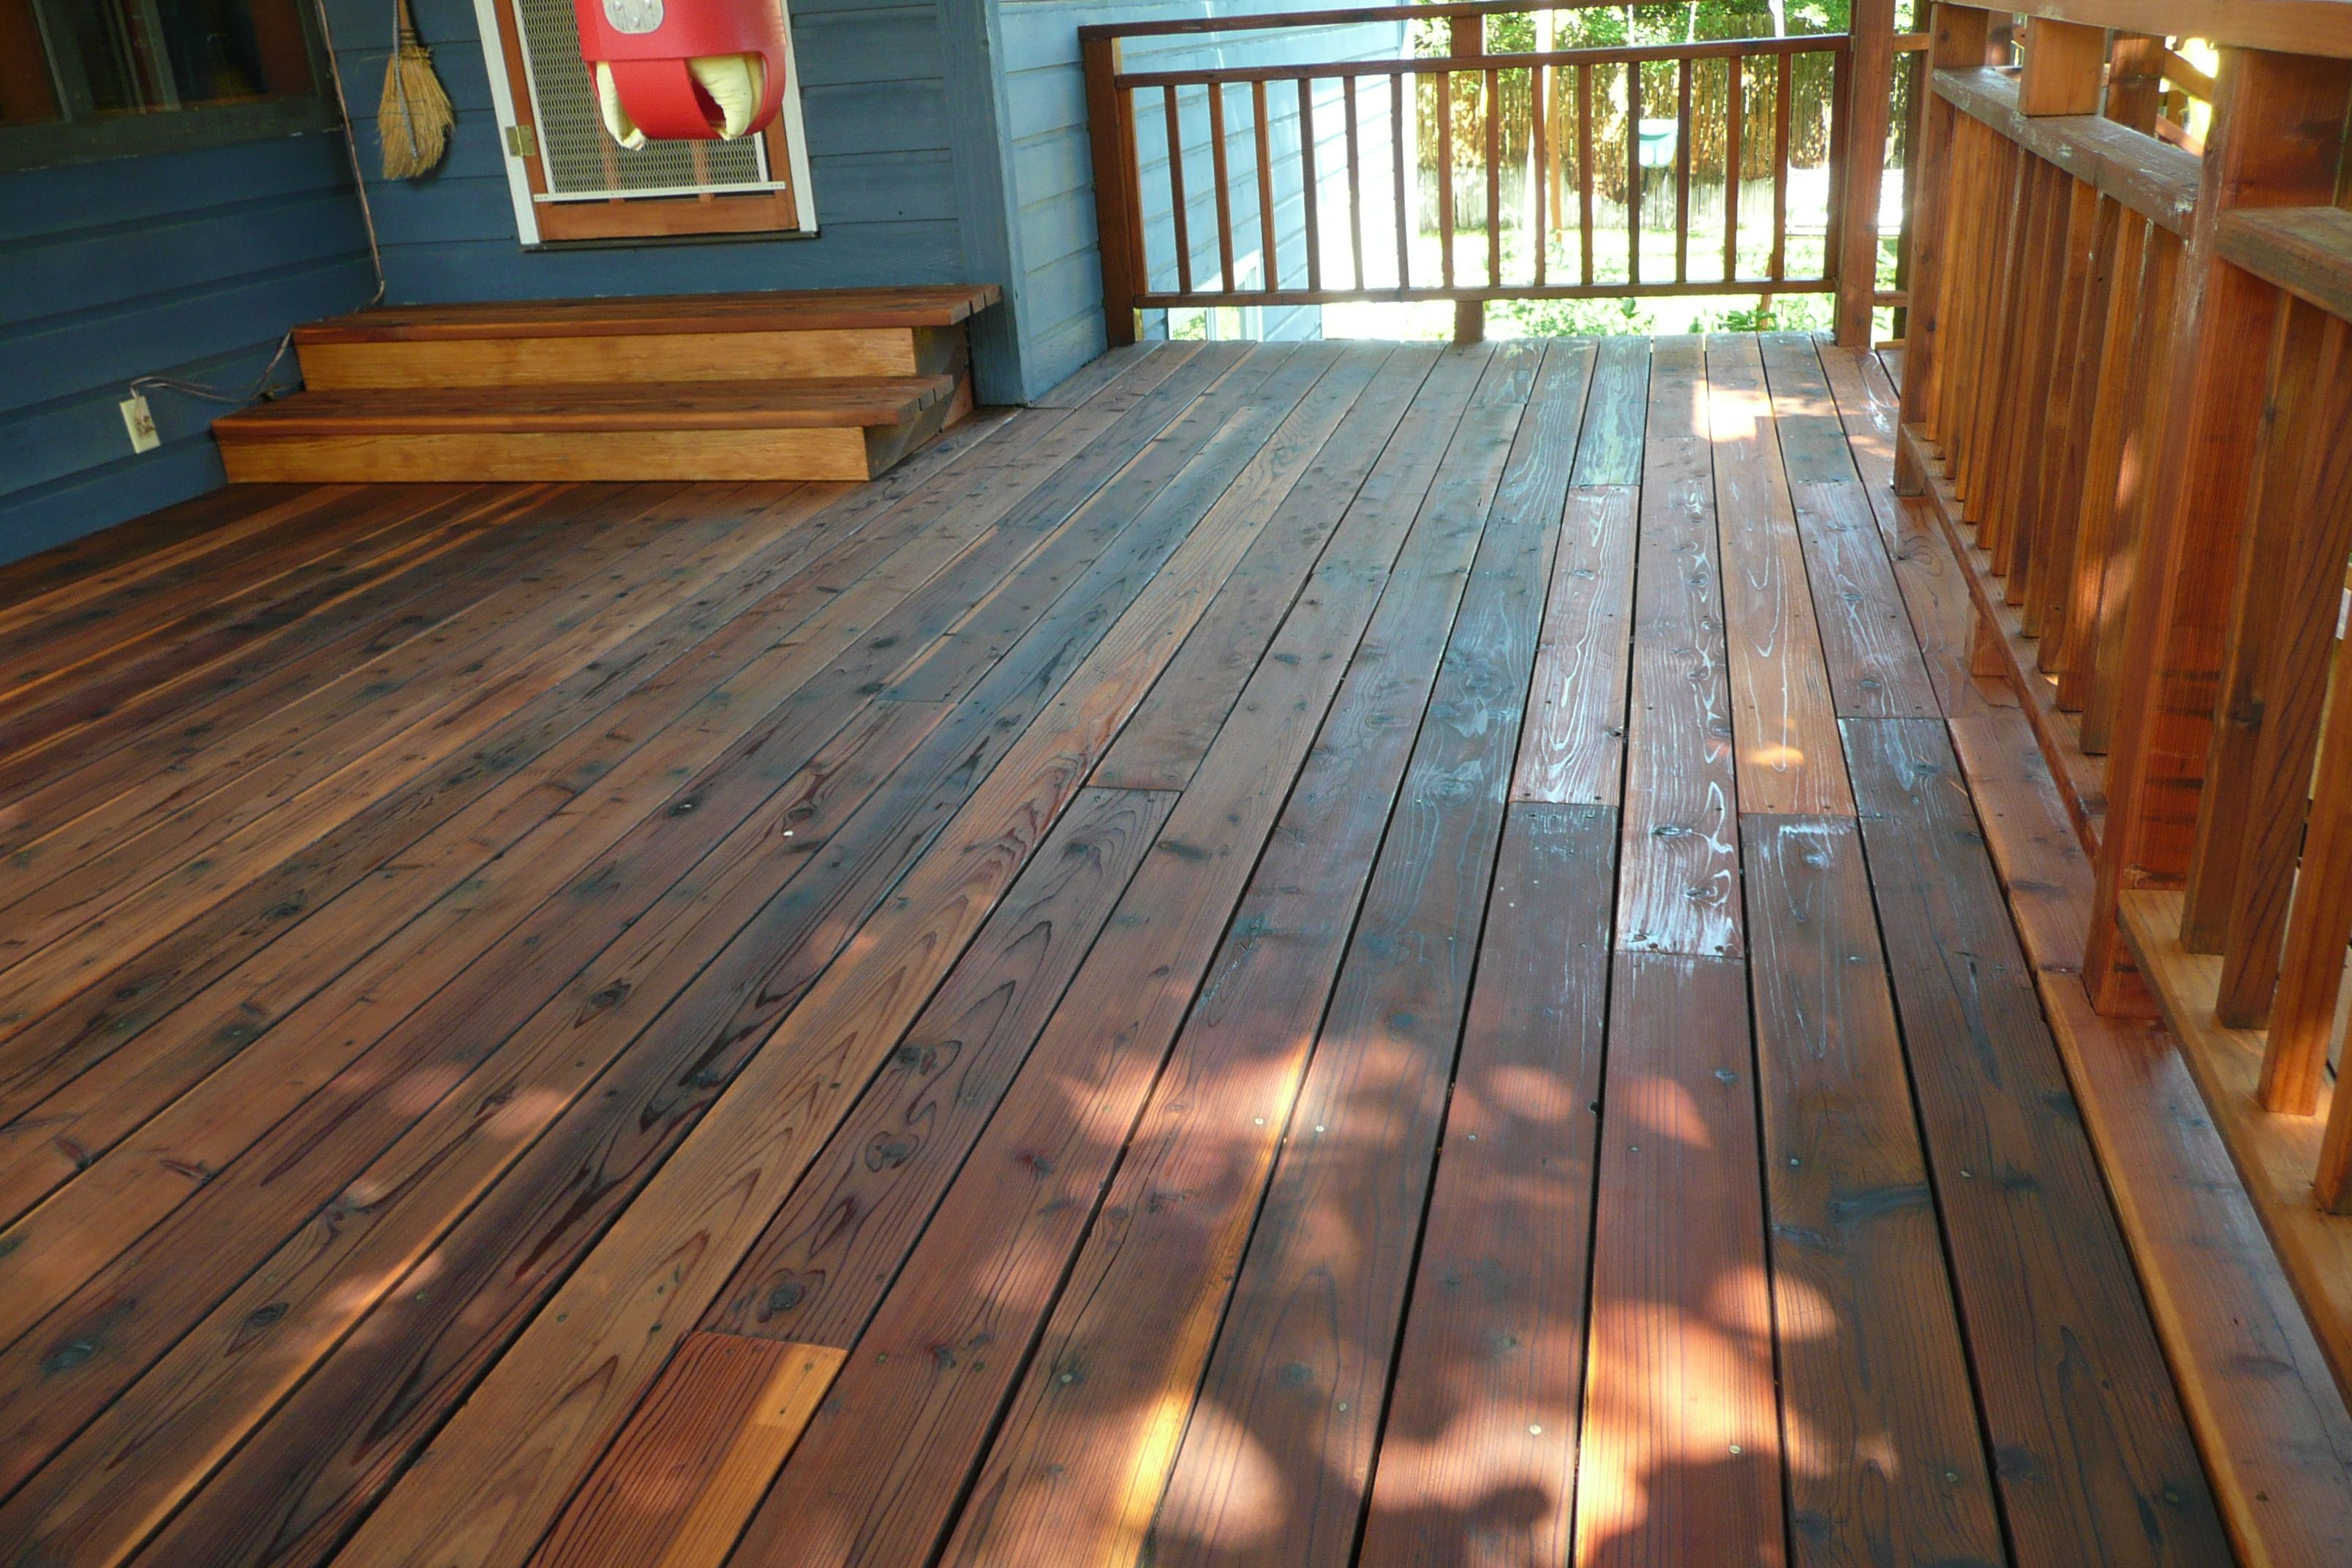 how to stain new pressure treated wood deck